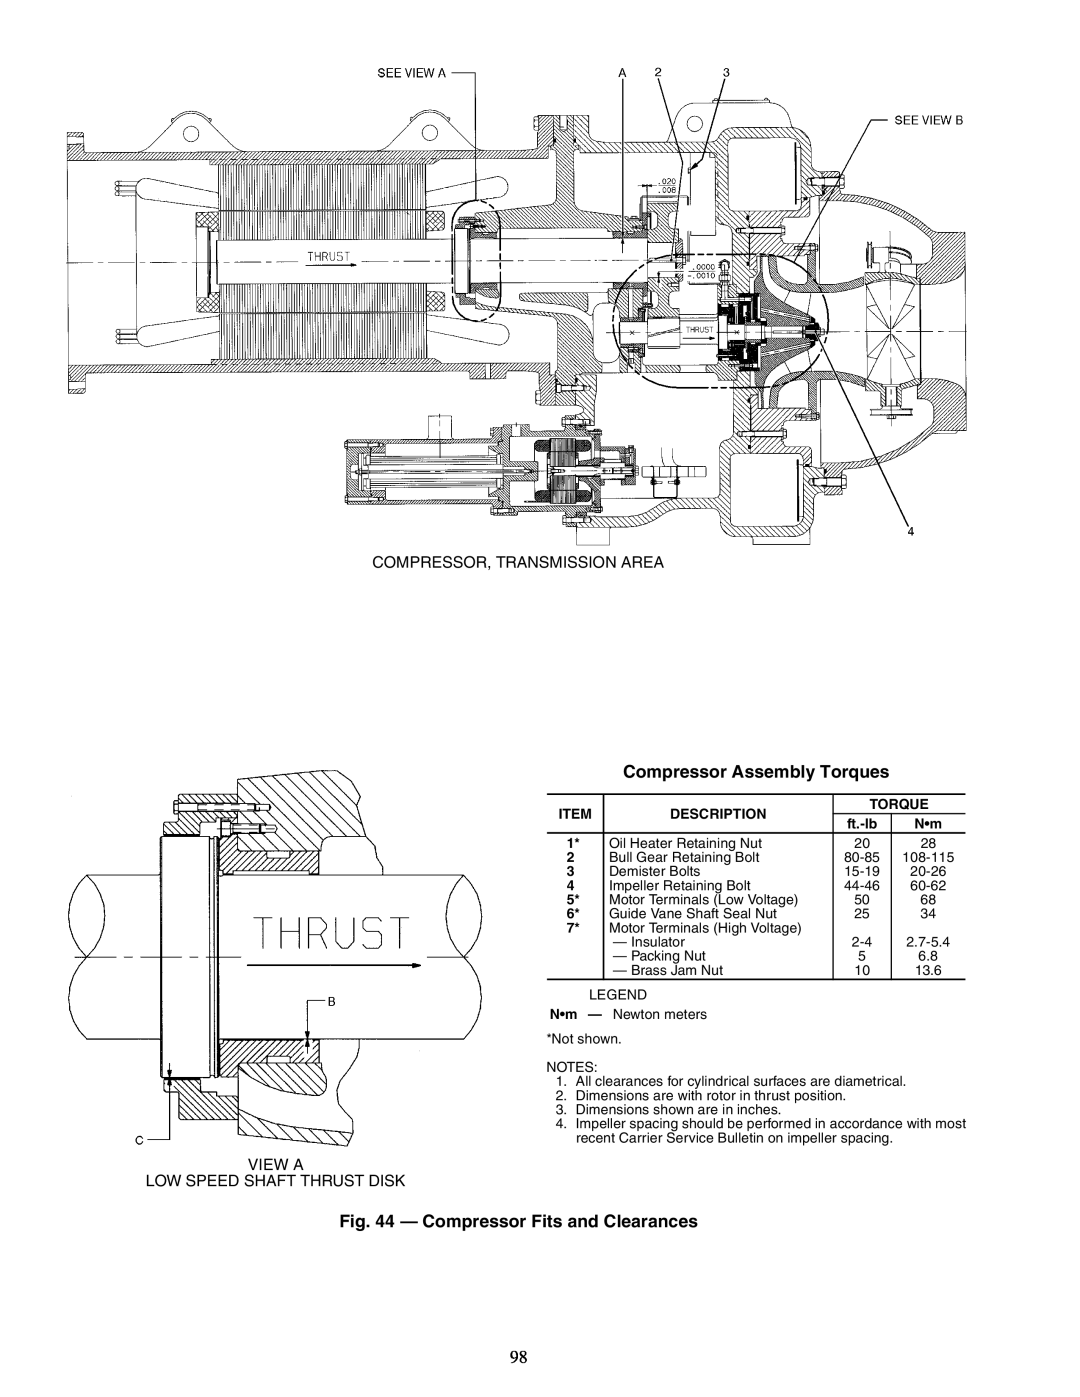 Carrier 19XR, XRV specifications Compressor Assembly Torques, Compressor Fits and Clearances, Compressor, Transmission Area 